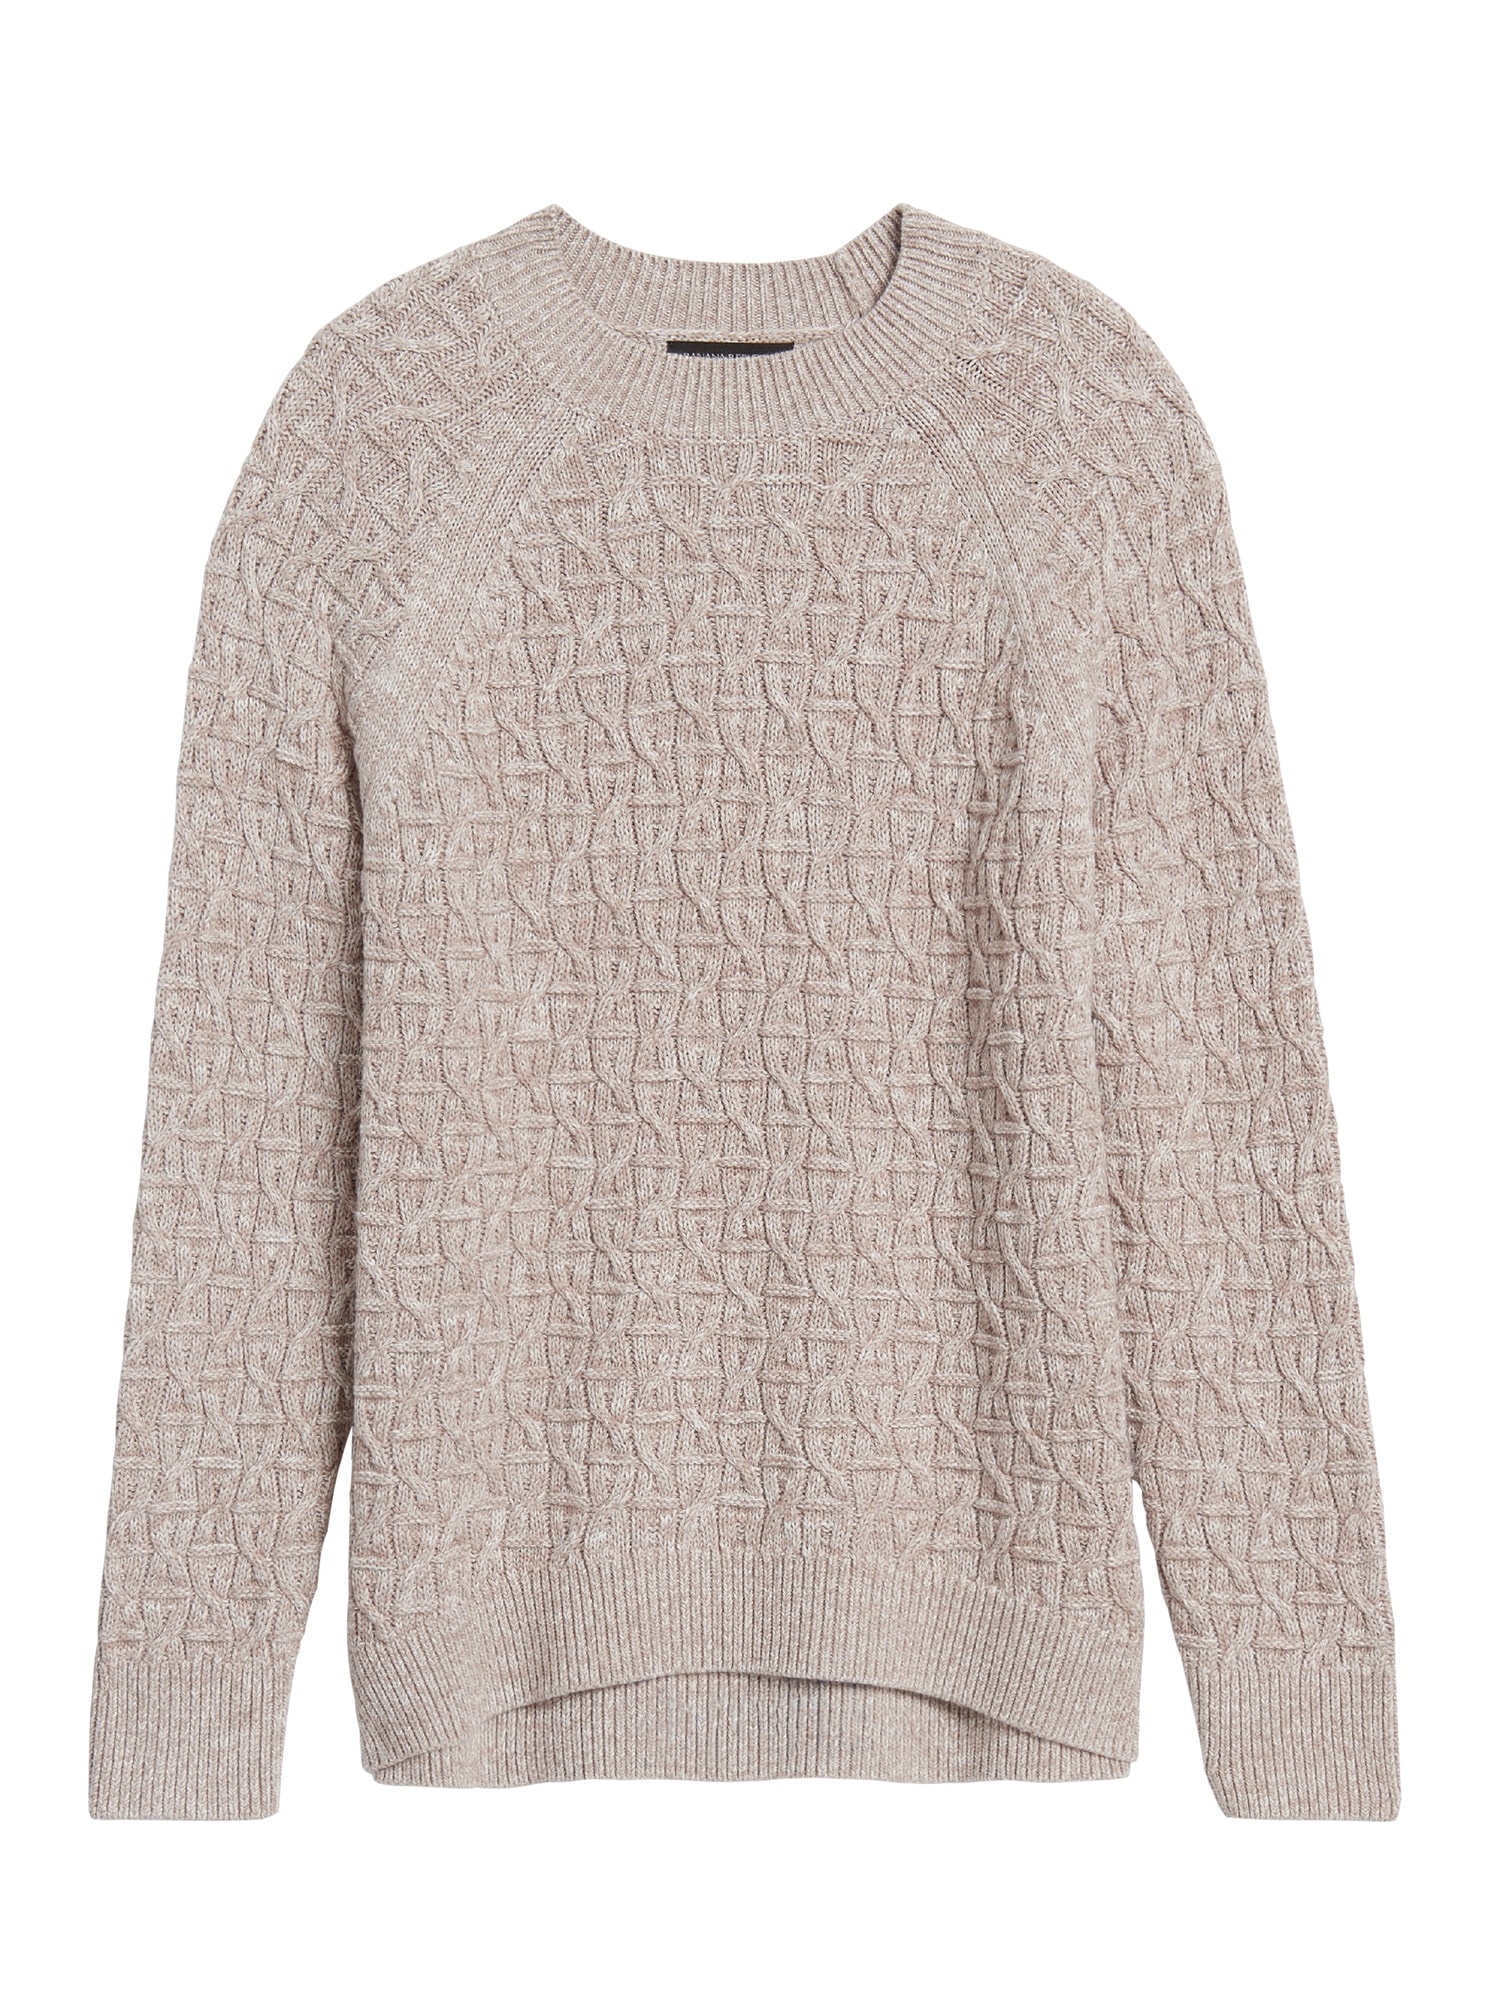 Marled Cable-Knit Sweater